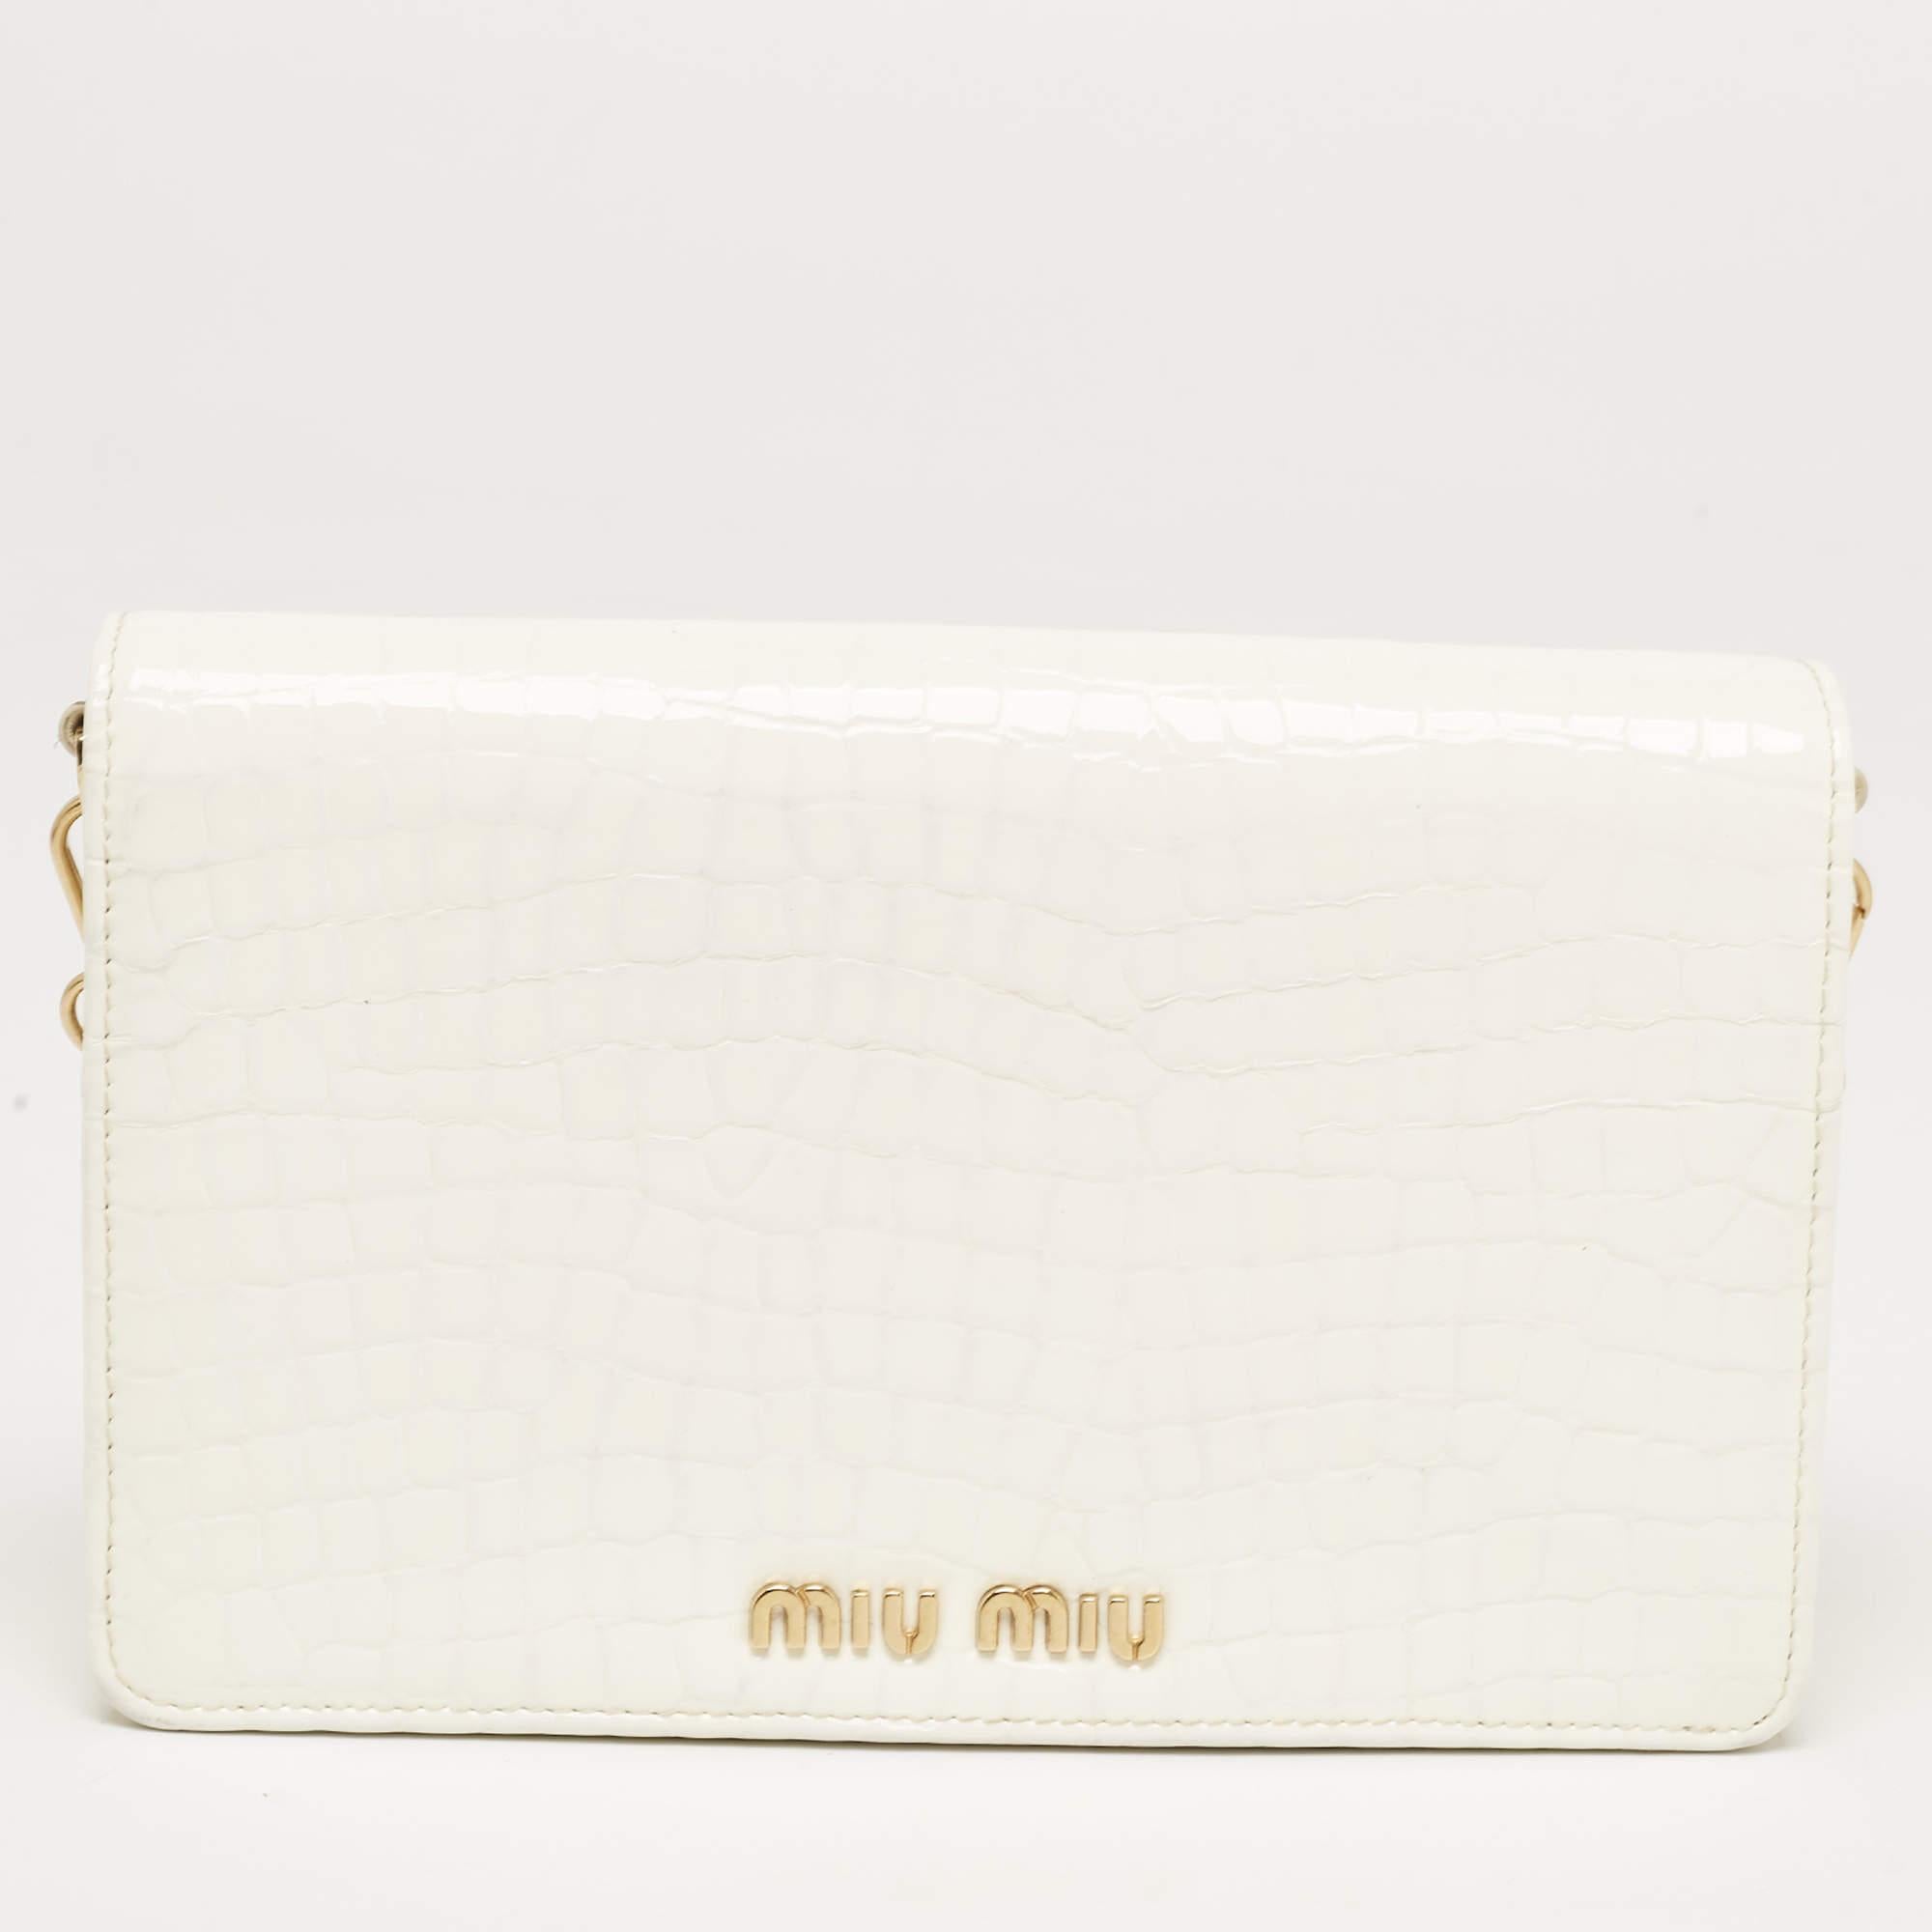 Just right for conveniently storing your valuables without weighing your look down, this Miu Miu clutch features a leather exterior with gold-tone metal fittings. Carry it in hand as a stylish evening accessory.

Includes: Pocket Mirror

